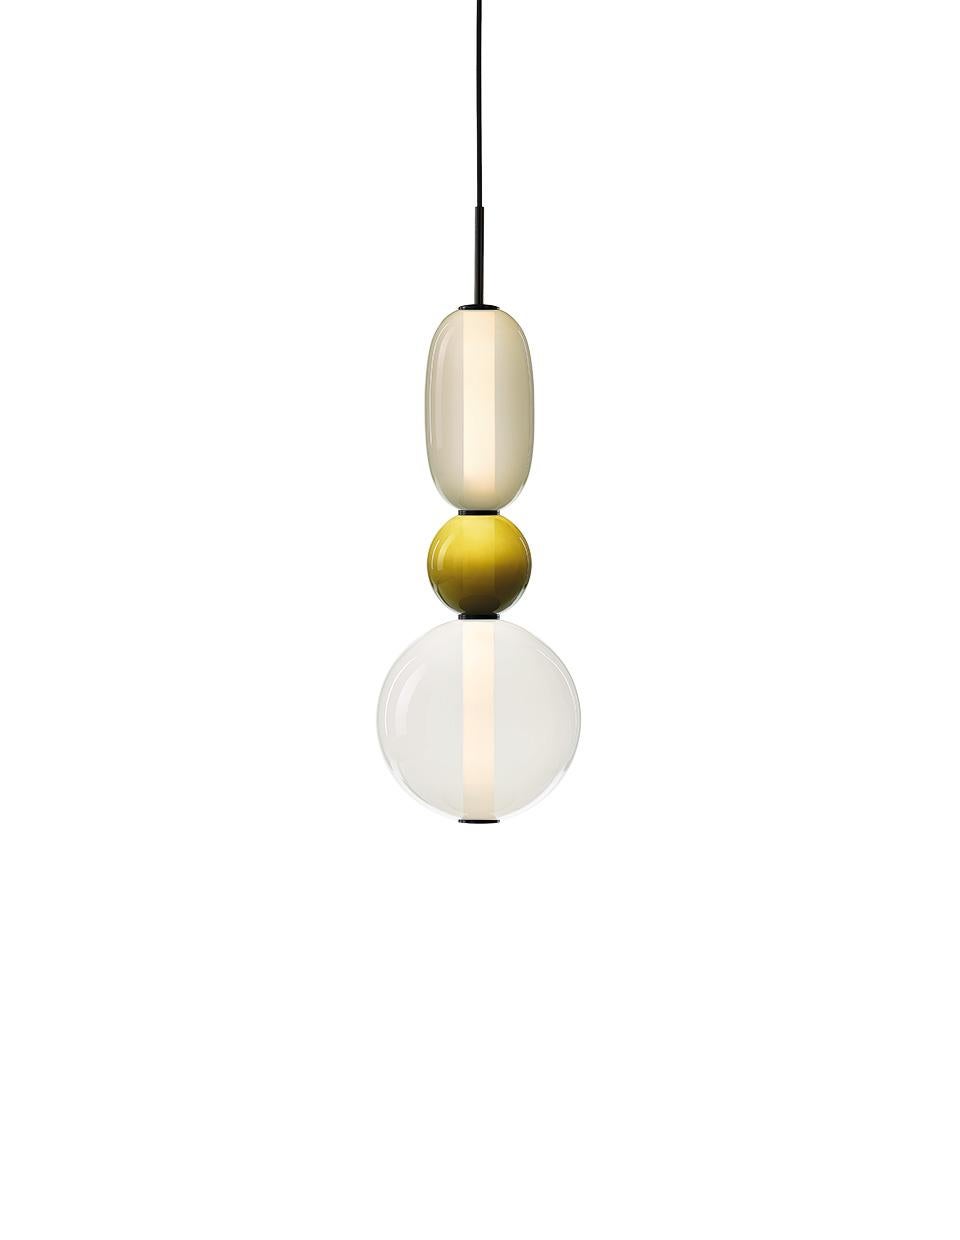 Contemporary blown crystal glass pendant - pebbles by Boris Klimek for Bomma.

Pebbles are reminders of exceptional moments or favorite places. Their diverse shapes and colors inspired BOMMA’s playful collection that invites you to express your